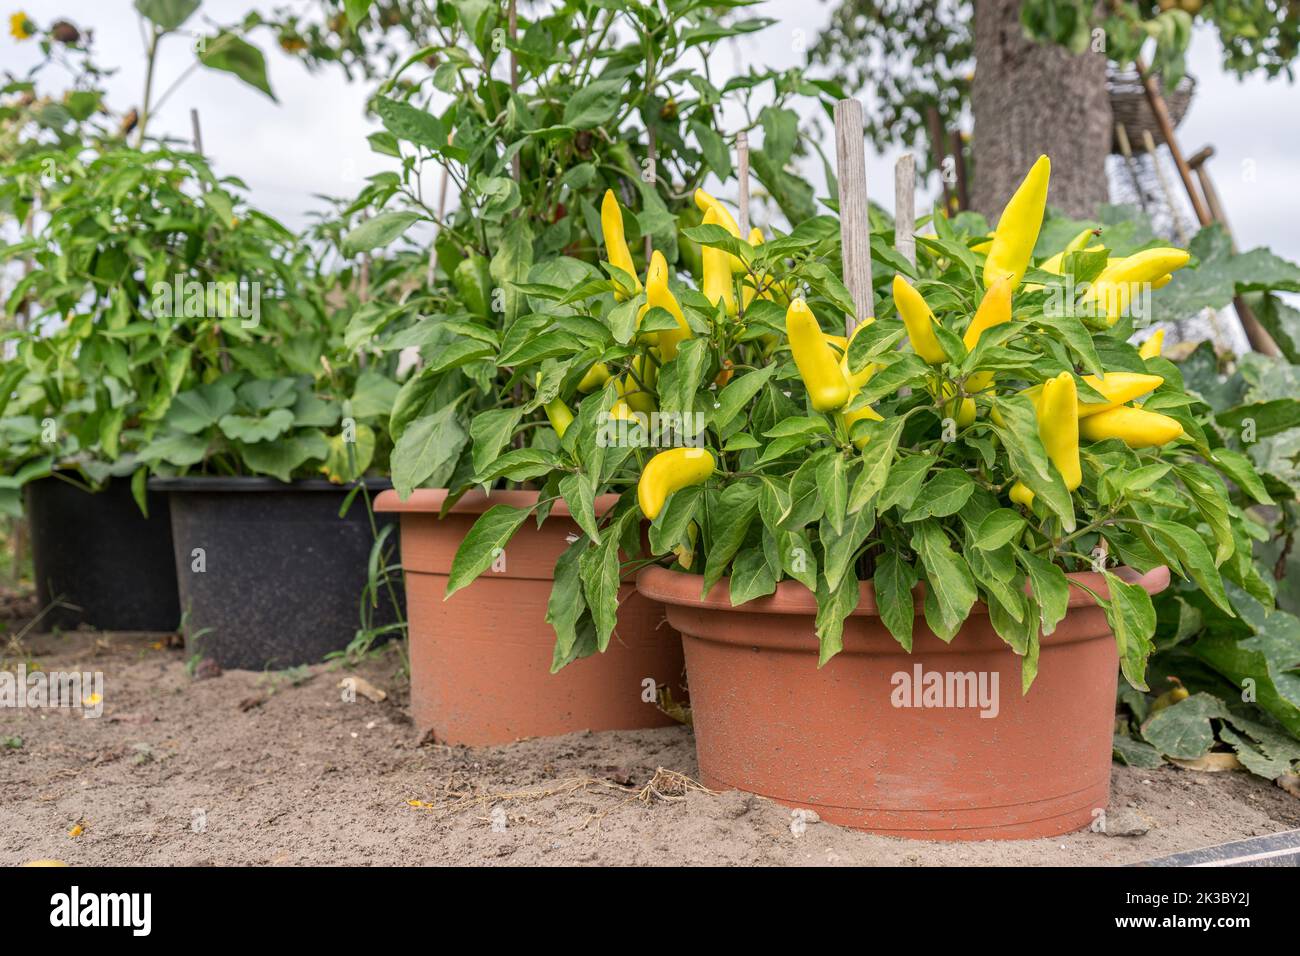 Plant with yellow peppers in a pot Stock Photo